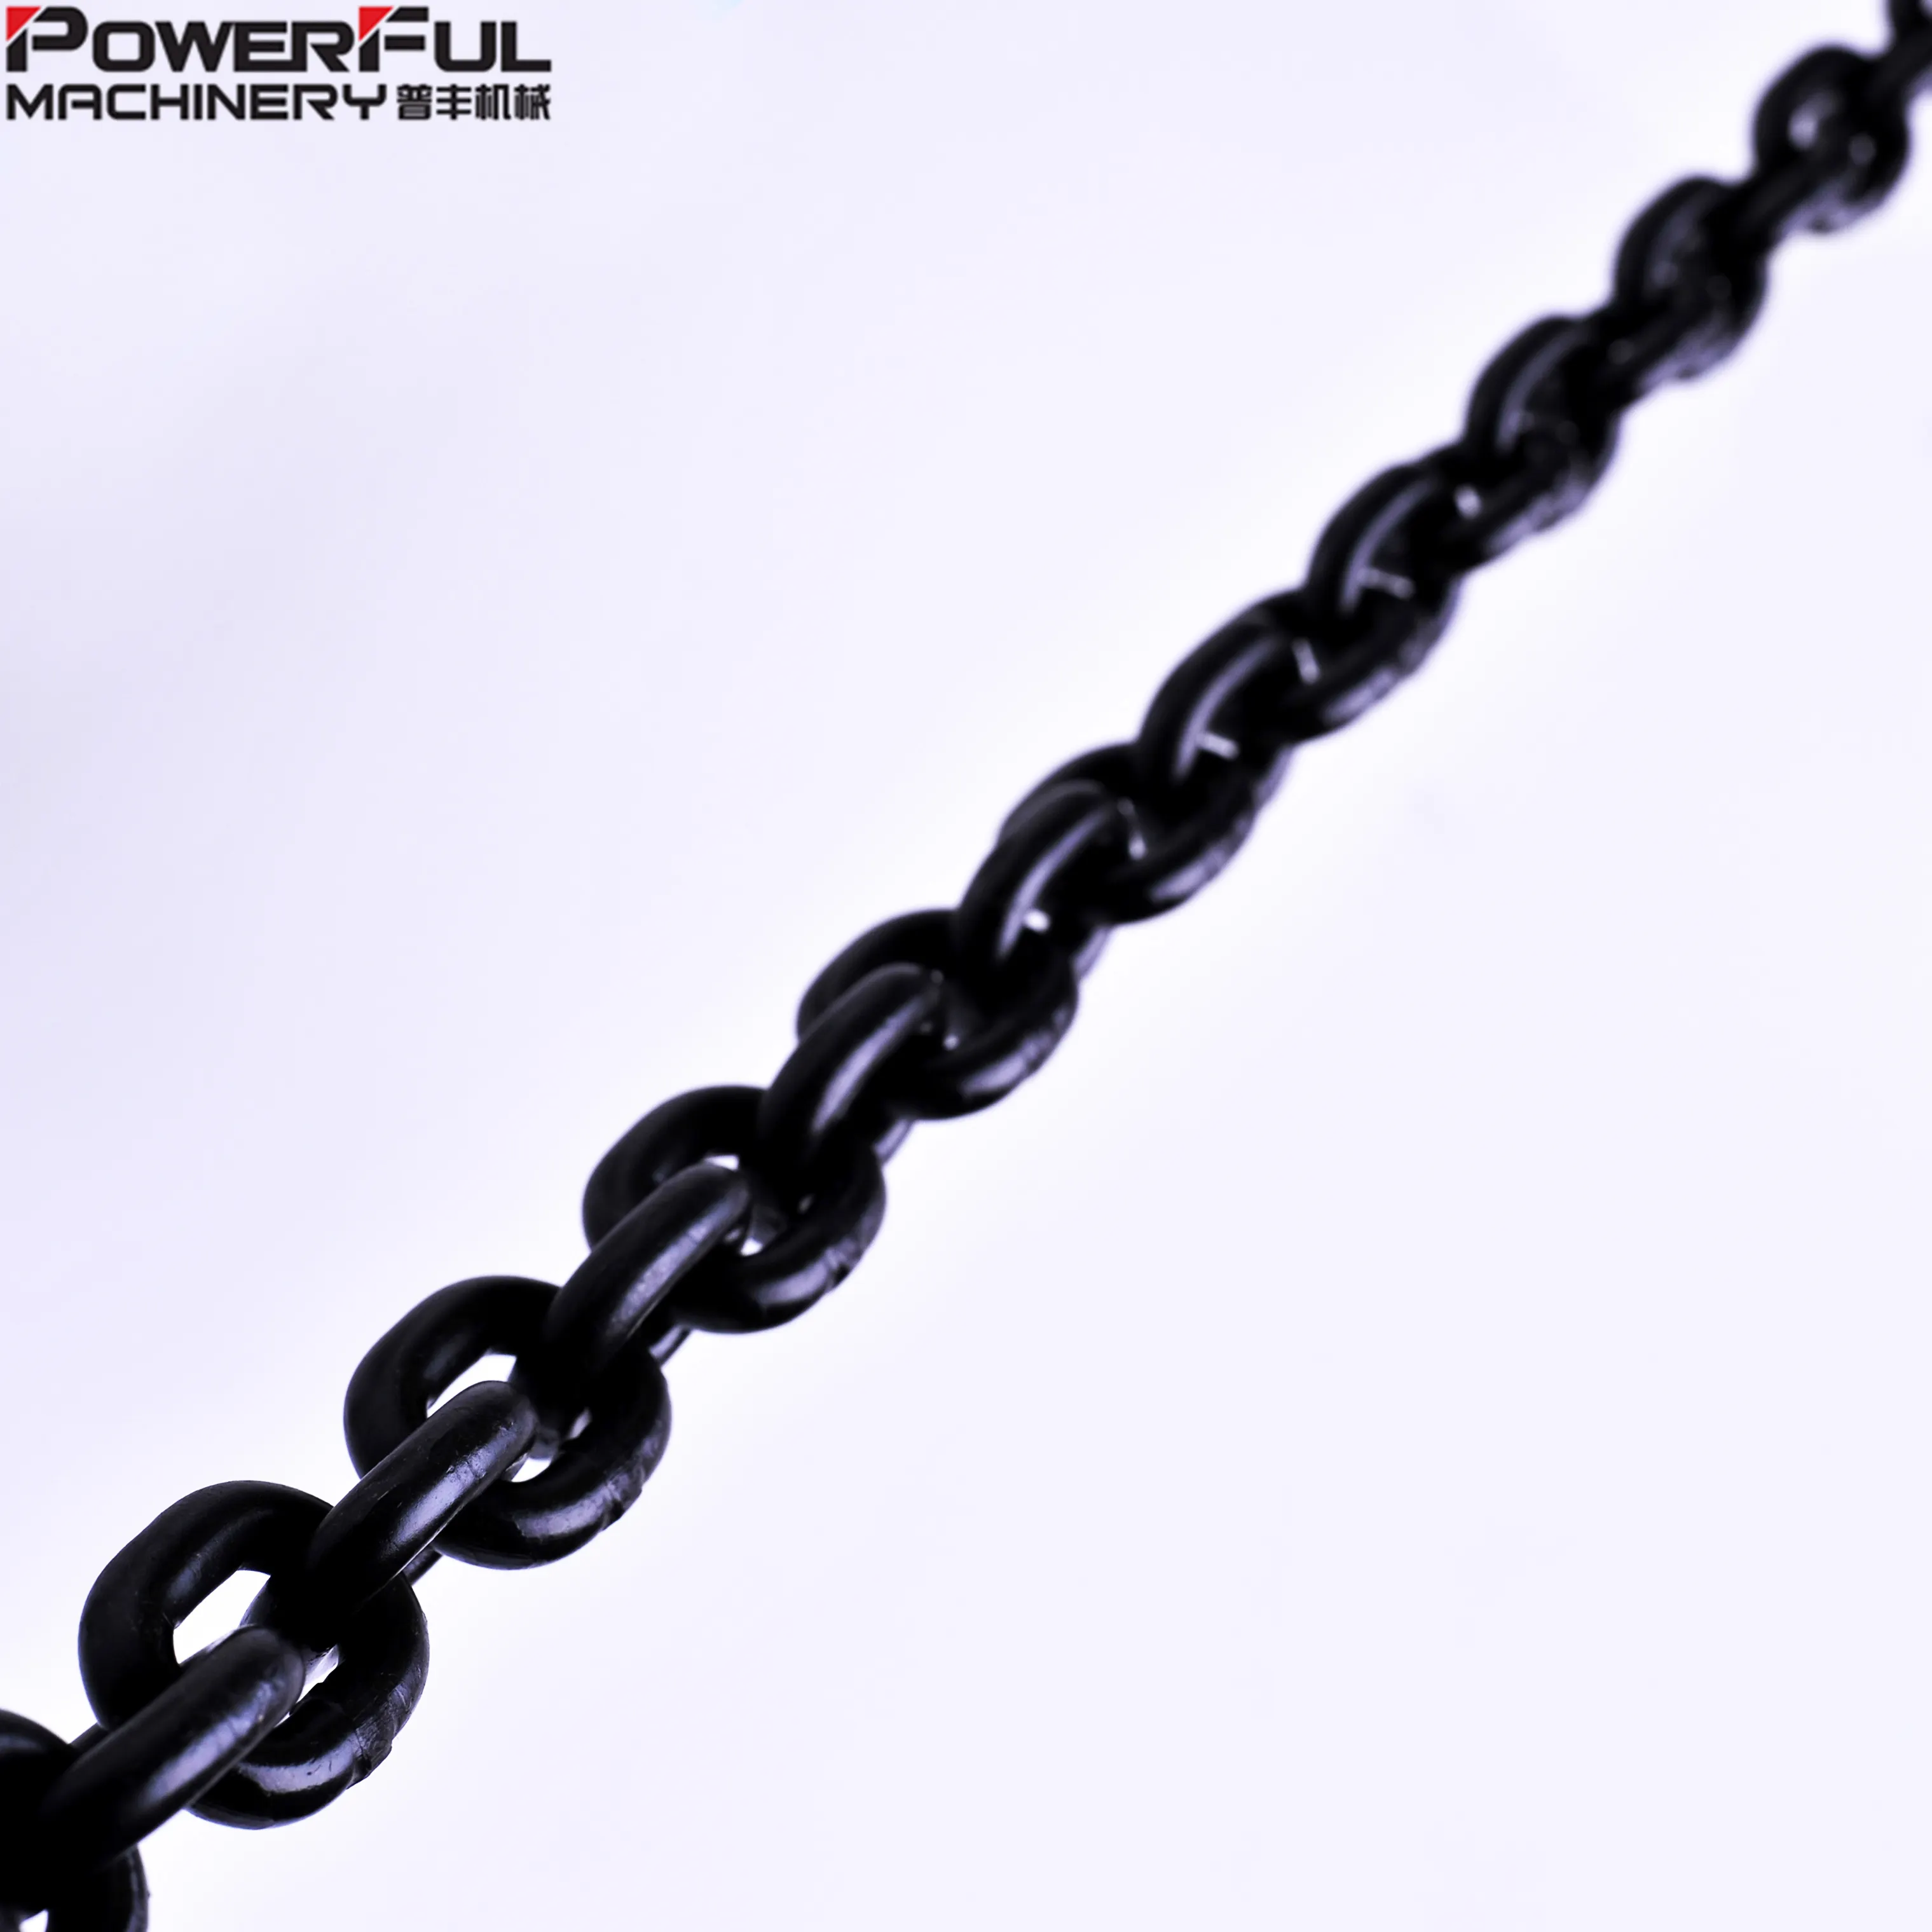 1/2" US TYPE GRADE 80 G80 CHAIN FOR LIFTING